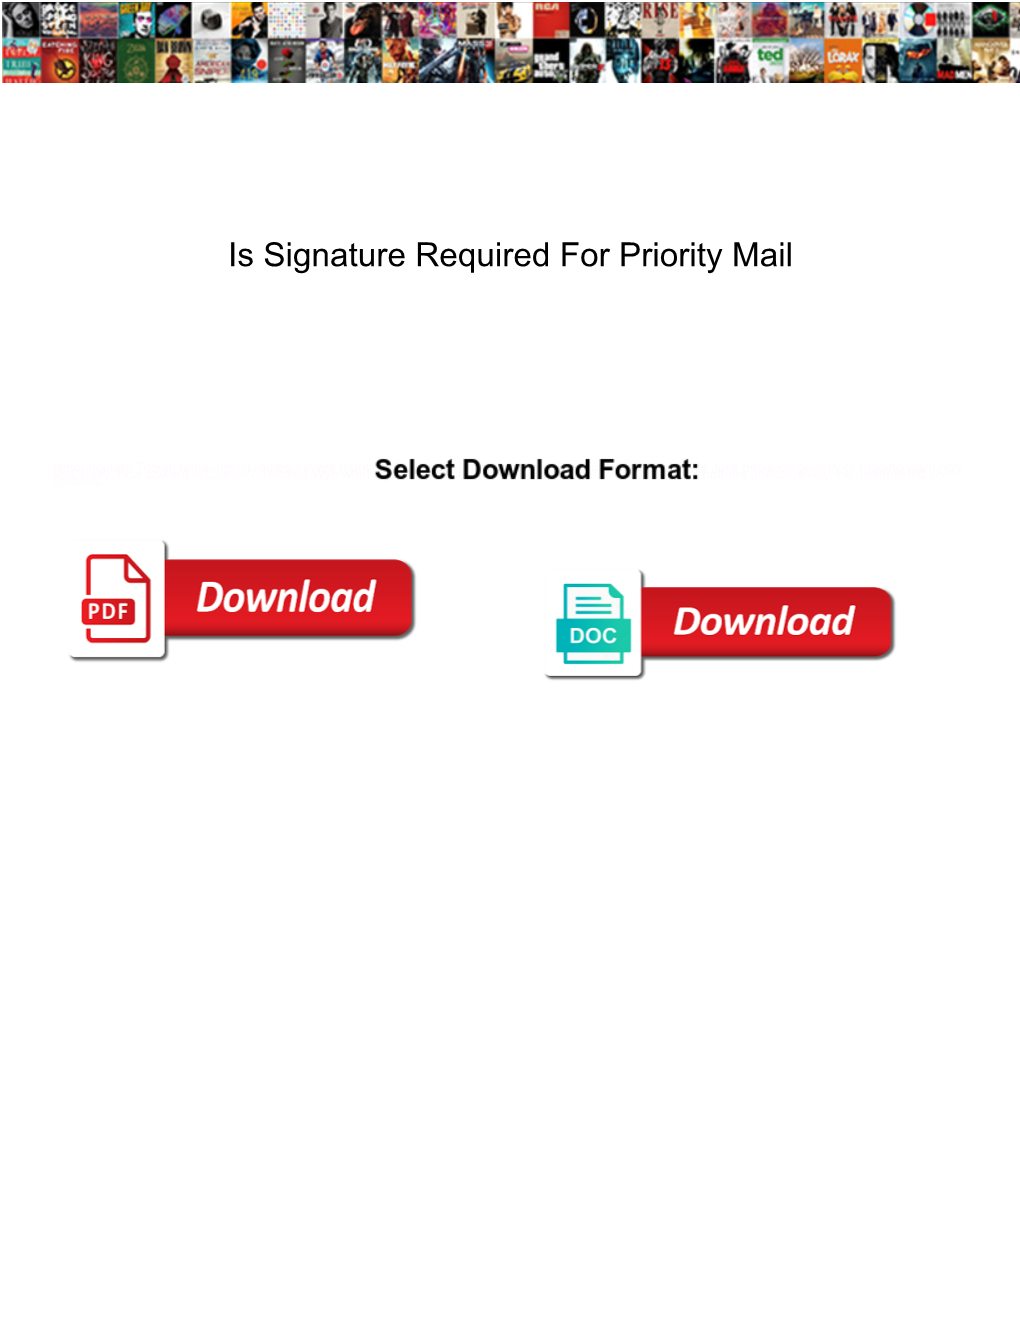 Is Signature Required for Priority Mail